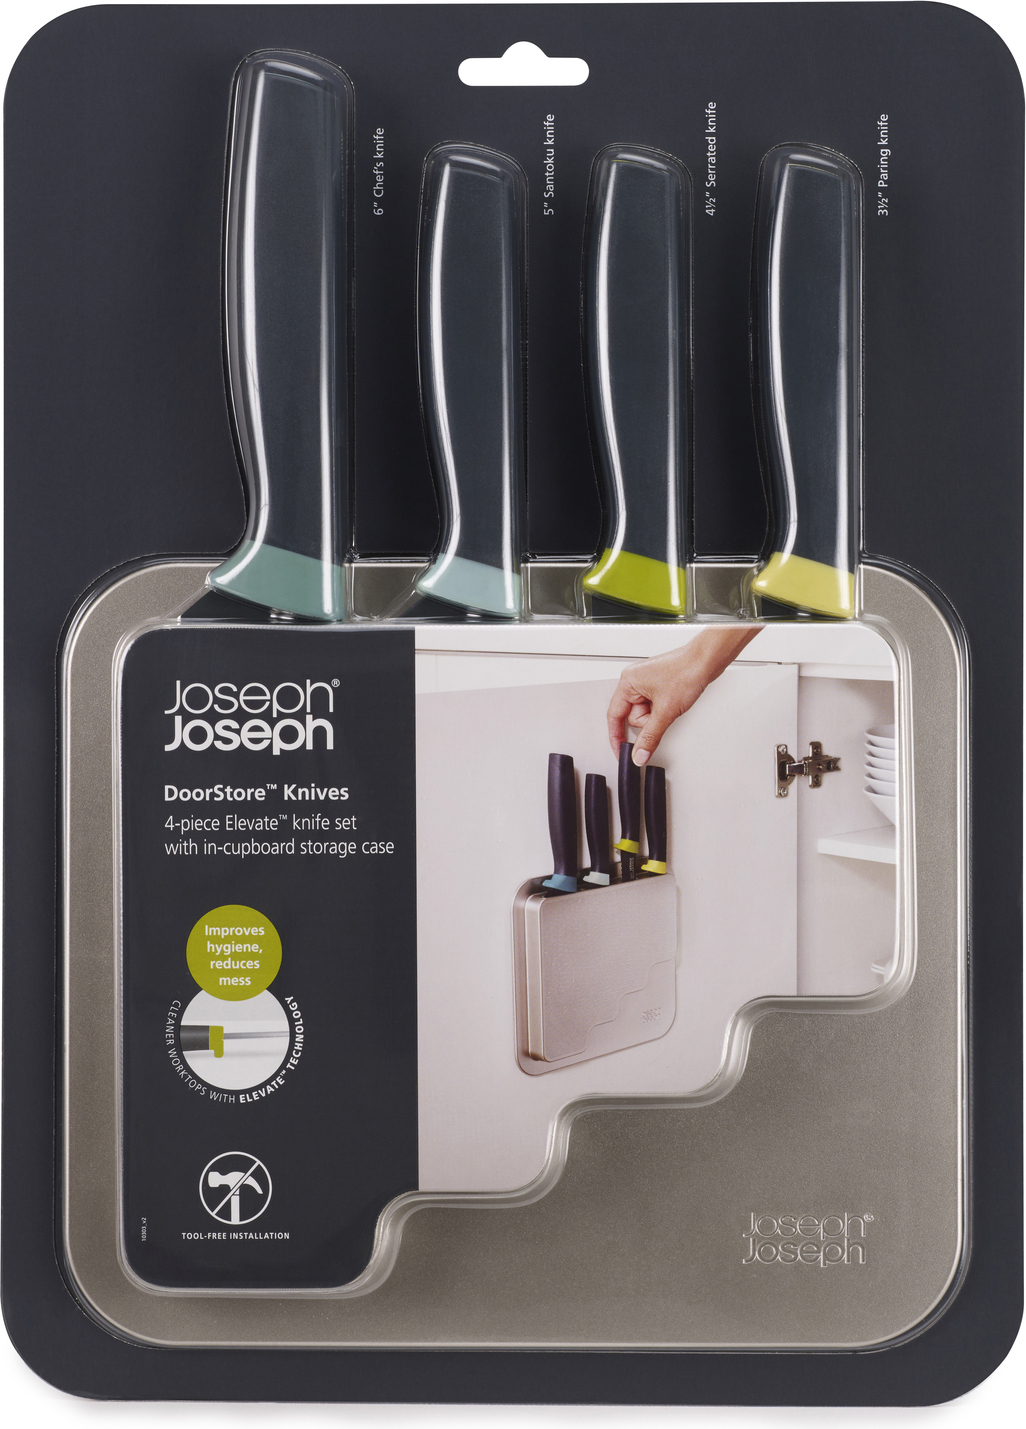 https://3fa-media.com/joseph-joseph/joseph-joseph-door-stone-organiser-with-4-knives-hanging__73273_f905301-s2500x2500.jpg